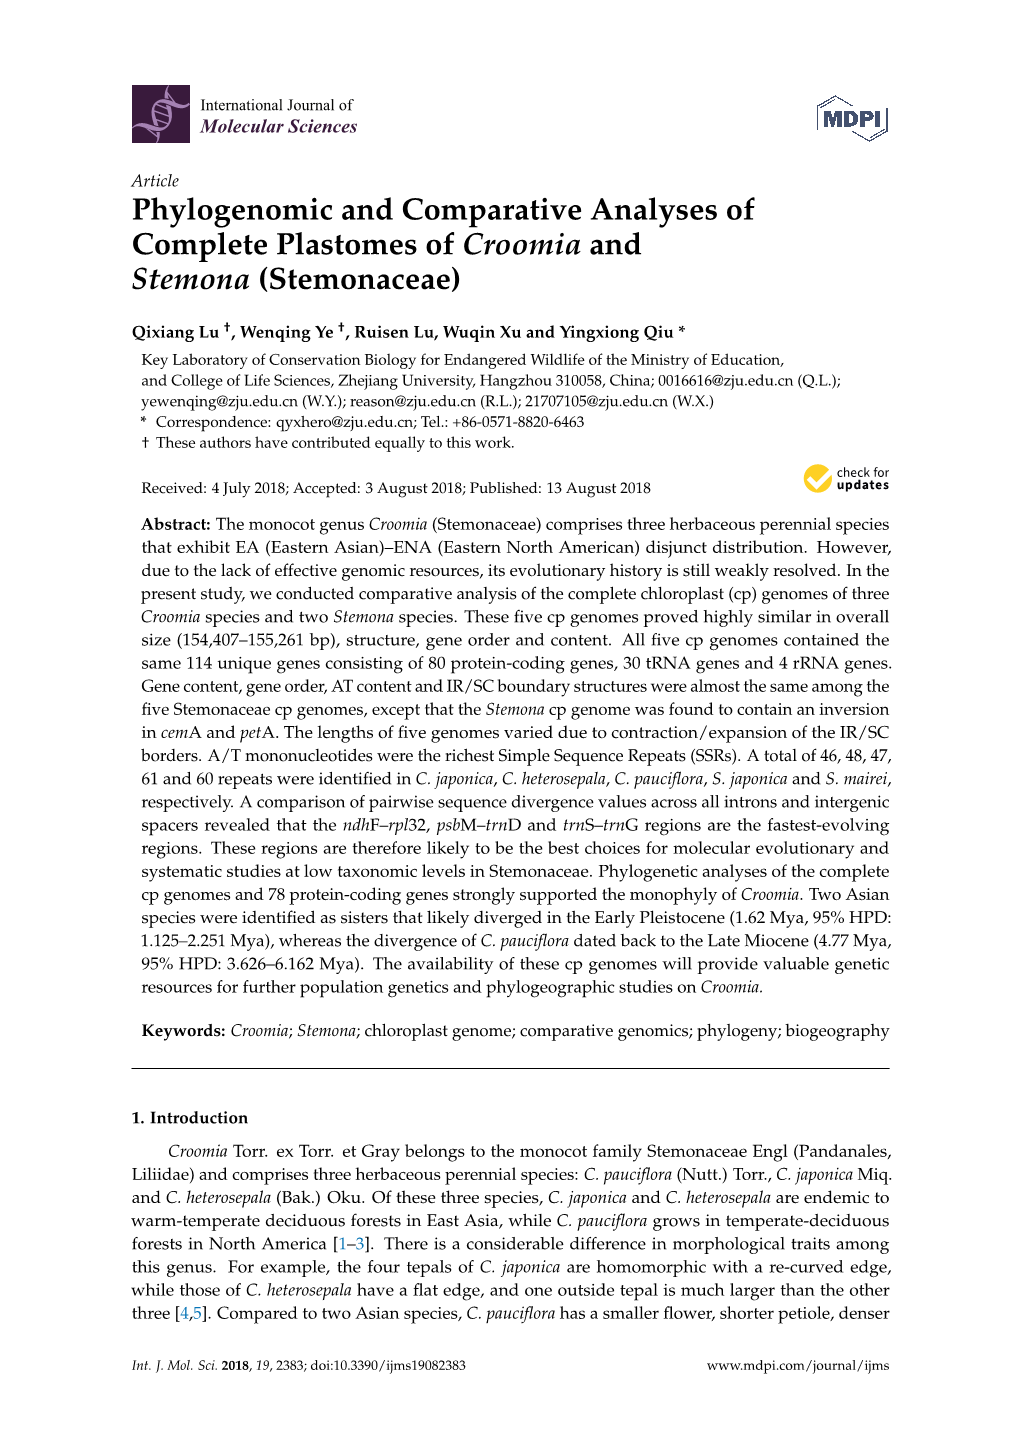 Phylogenomic and Comparative Analyses of Complete Plastomes of Croomia and Stemona (Stemonaceae)